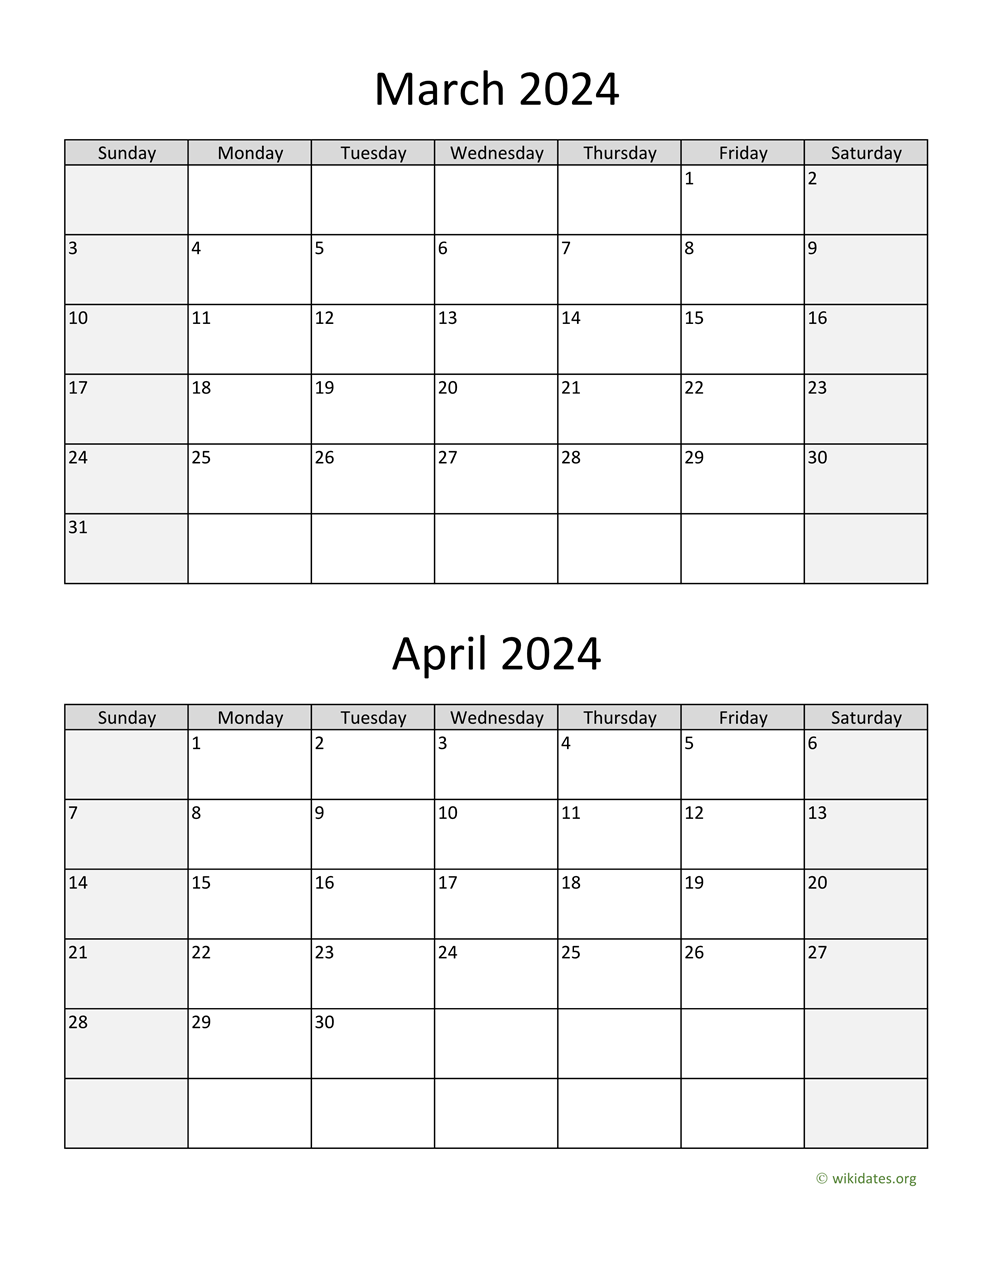 March And April 2024 Calendar | Wikidates for March April May Calendar 2024 Printable